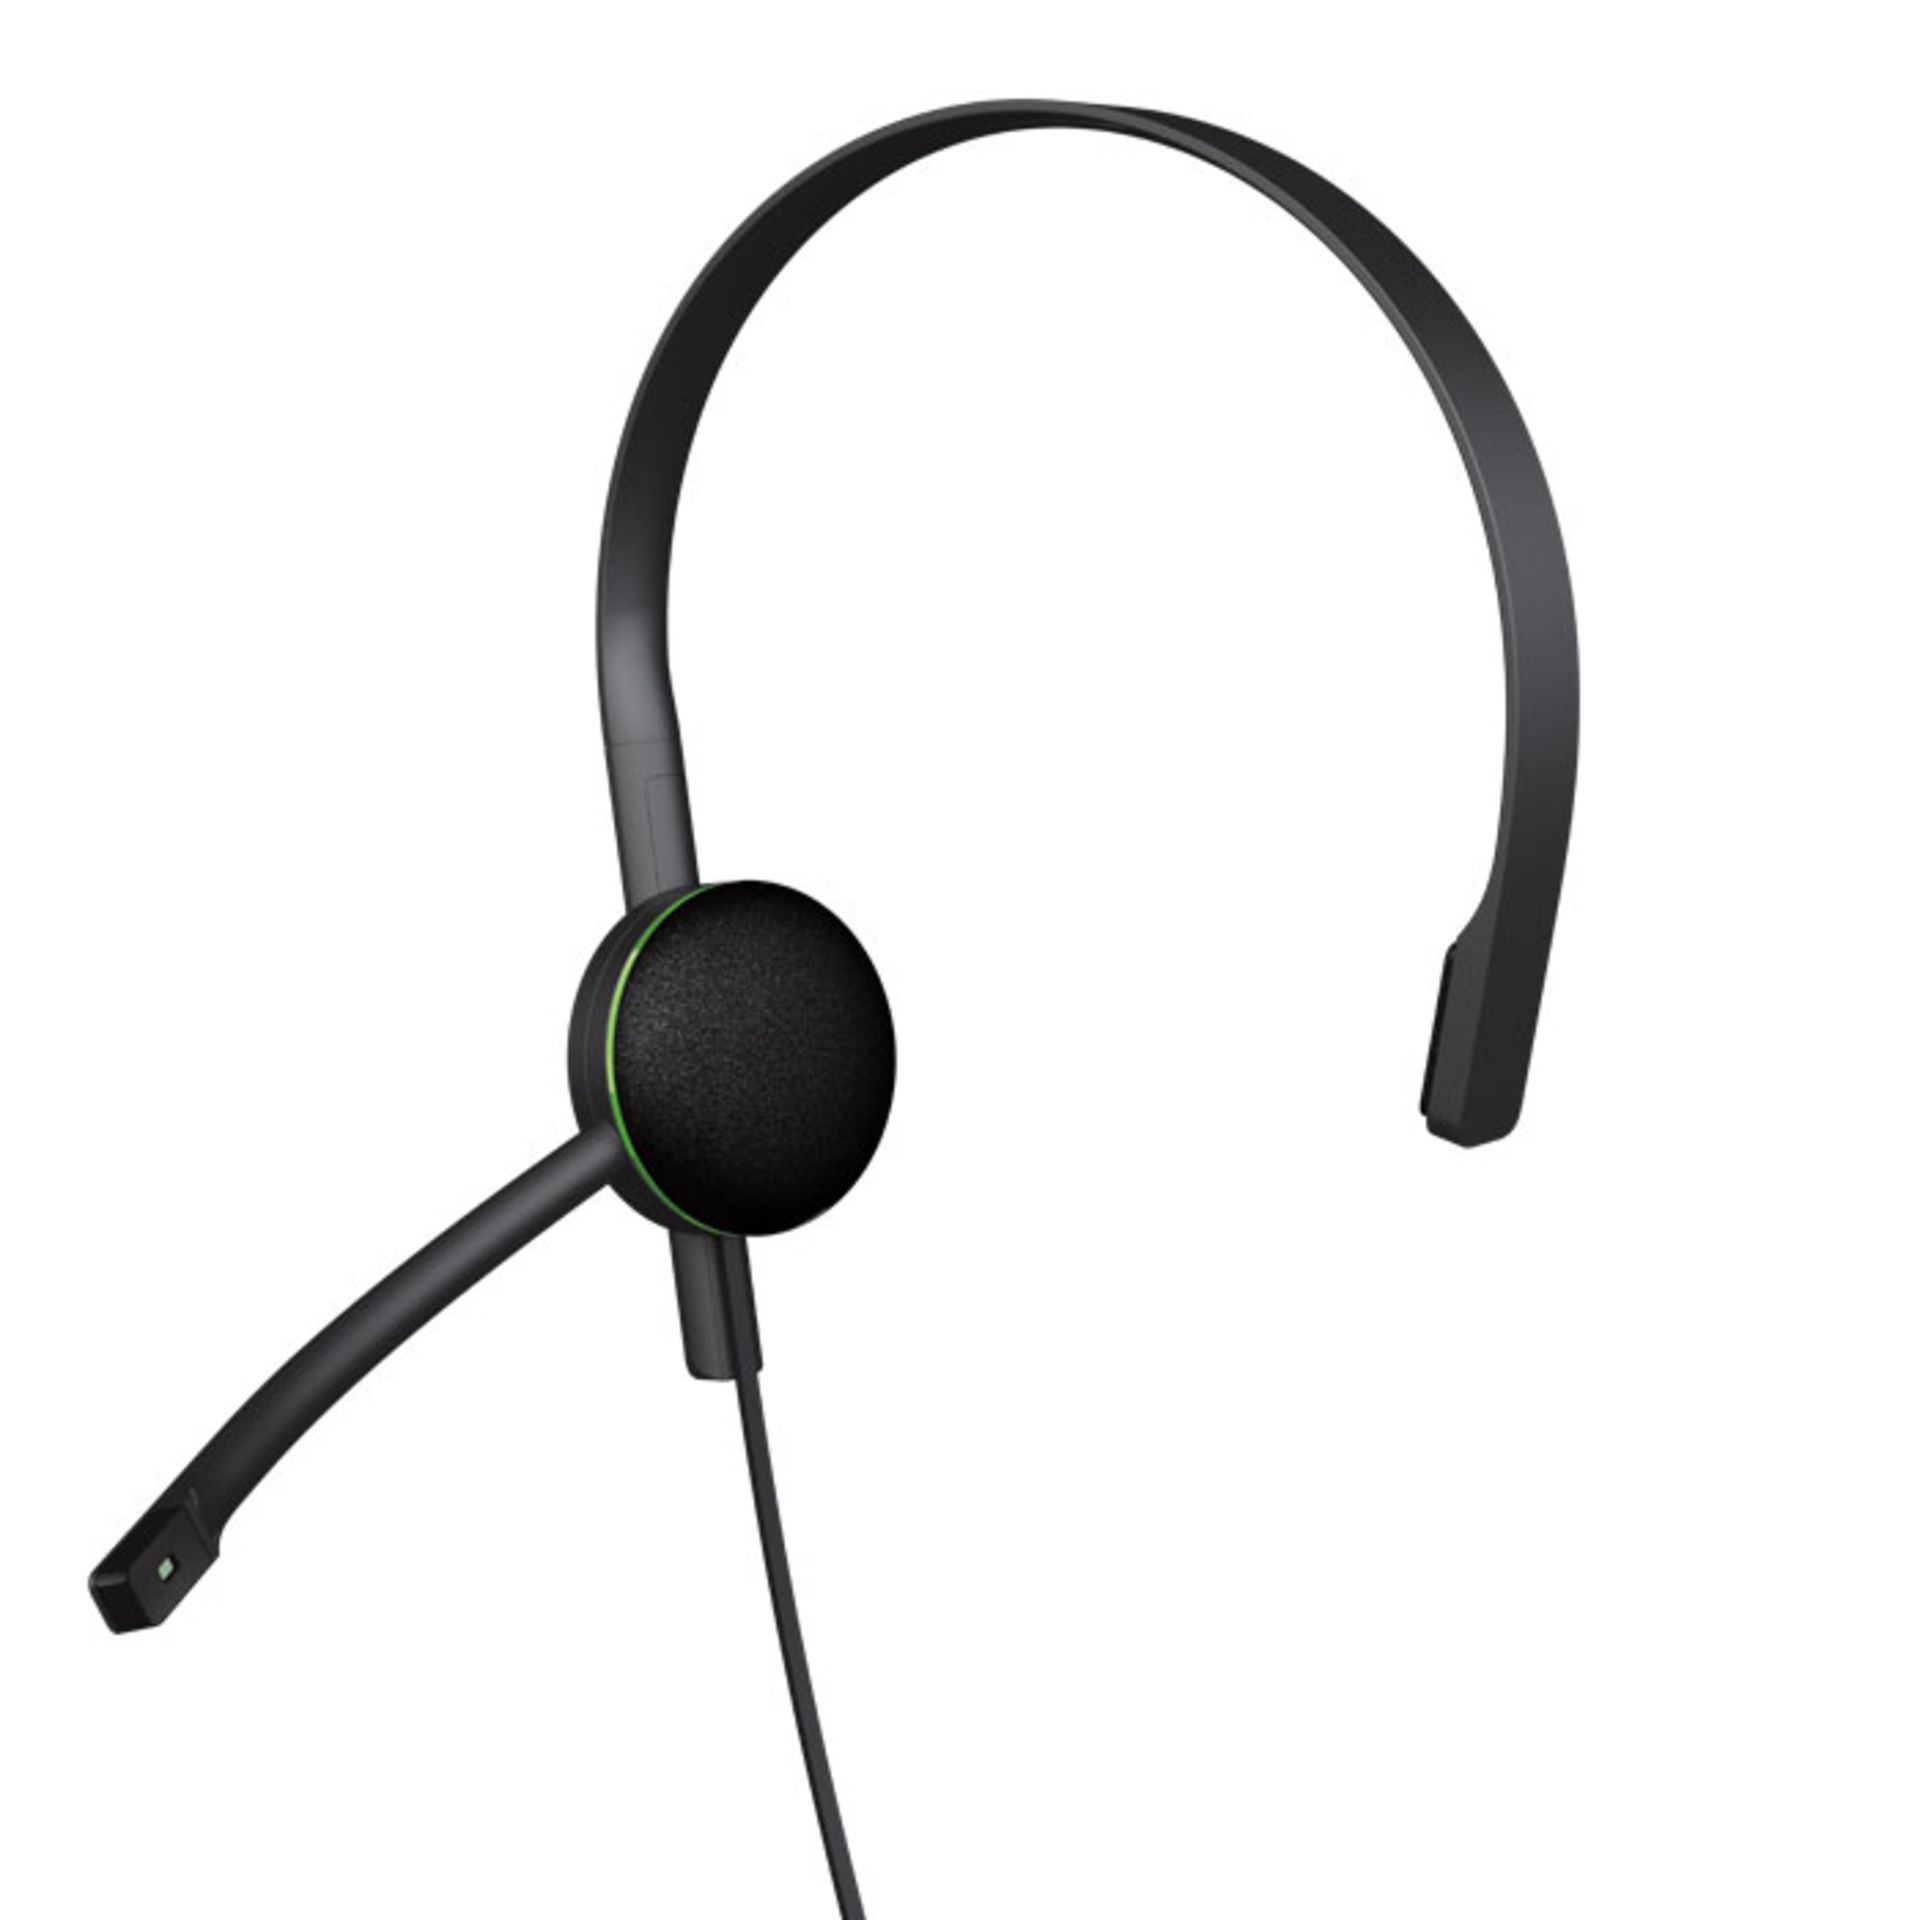 XBOX CHAT HEADSET AND KEYBOARD (DELIVERY BAND A)